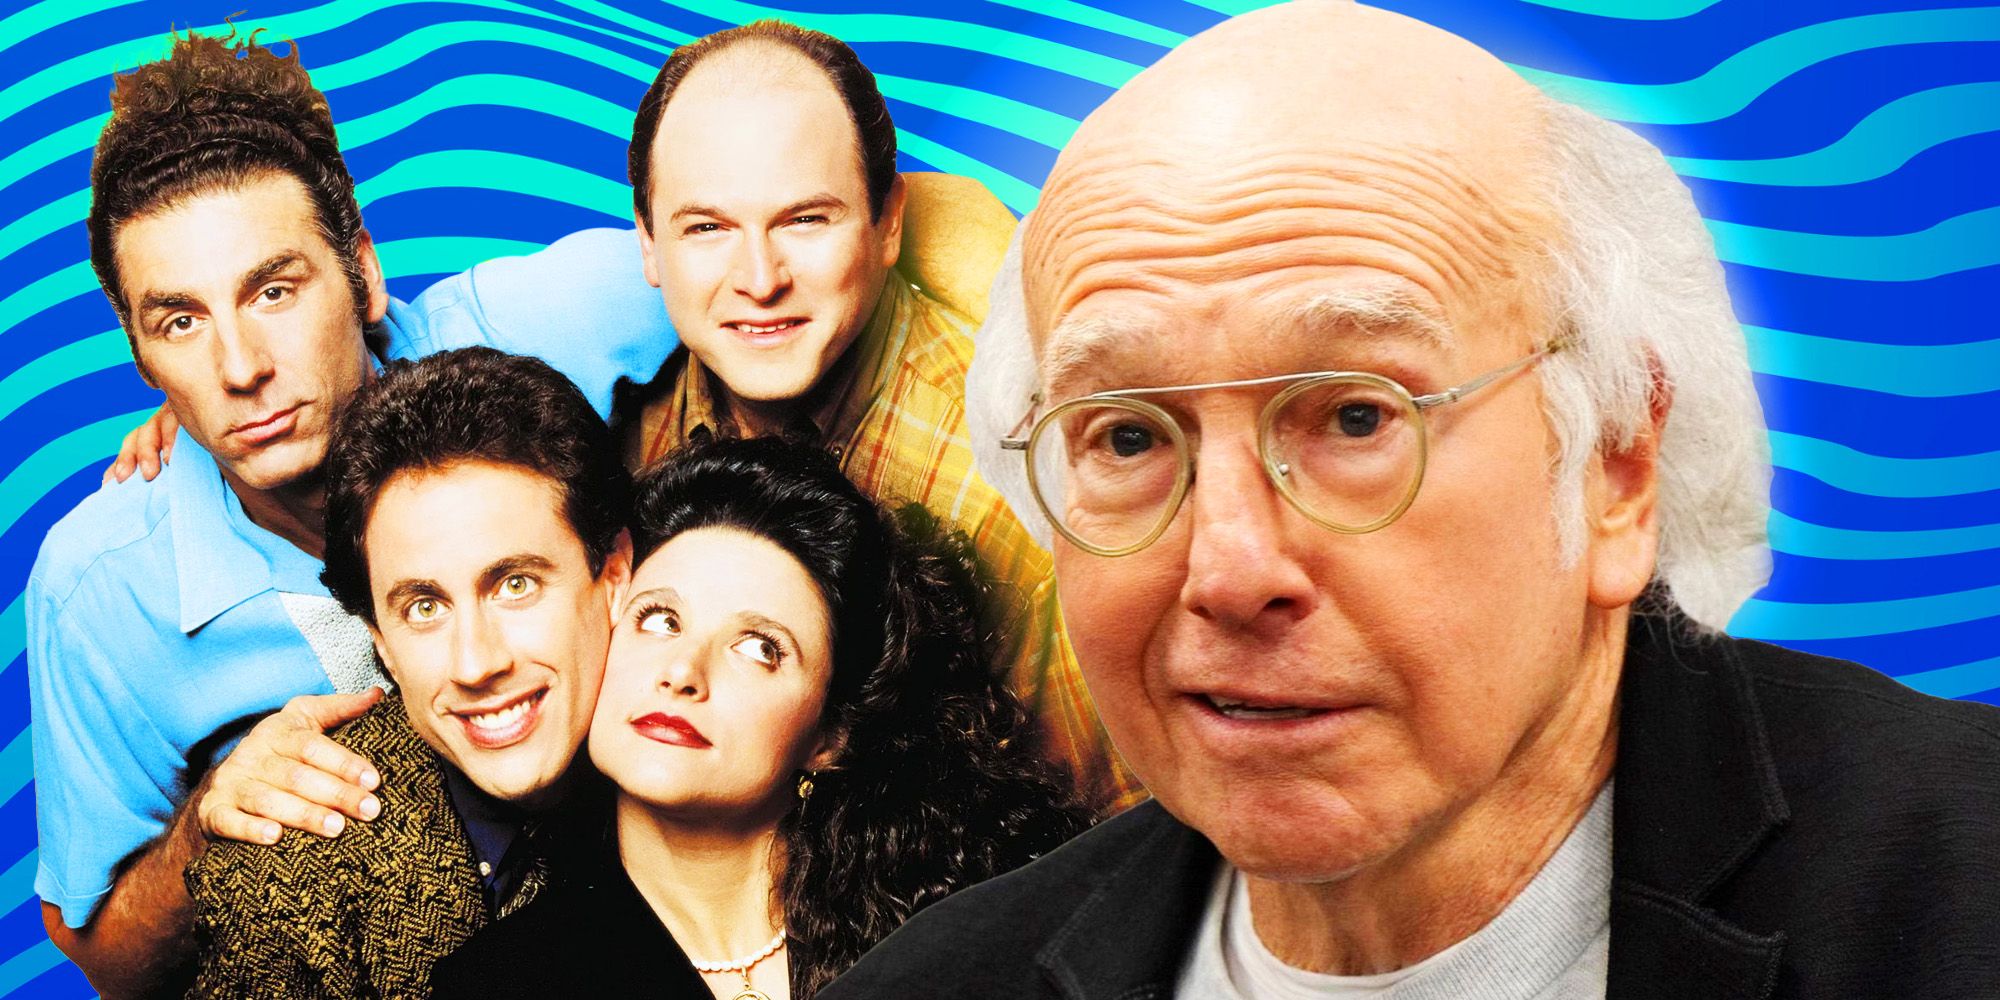 Larry David and the cast of Seinfeld